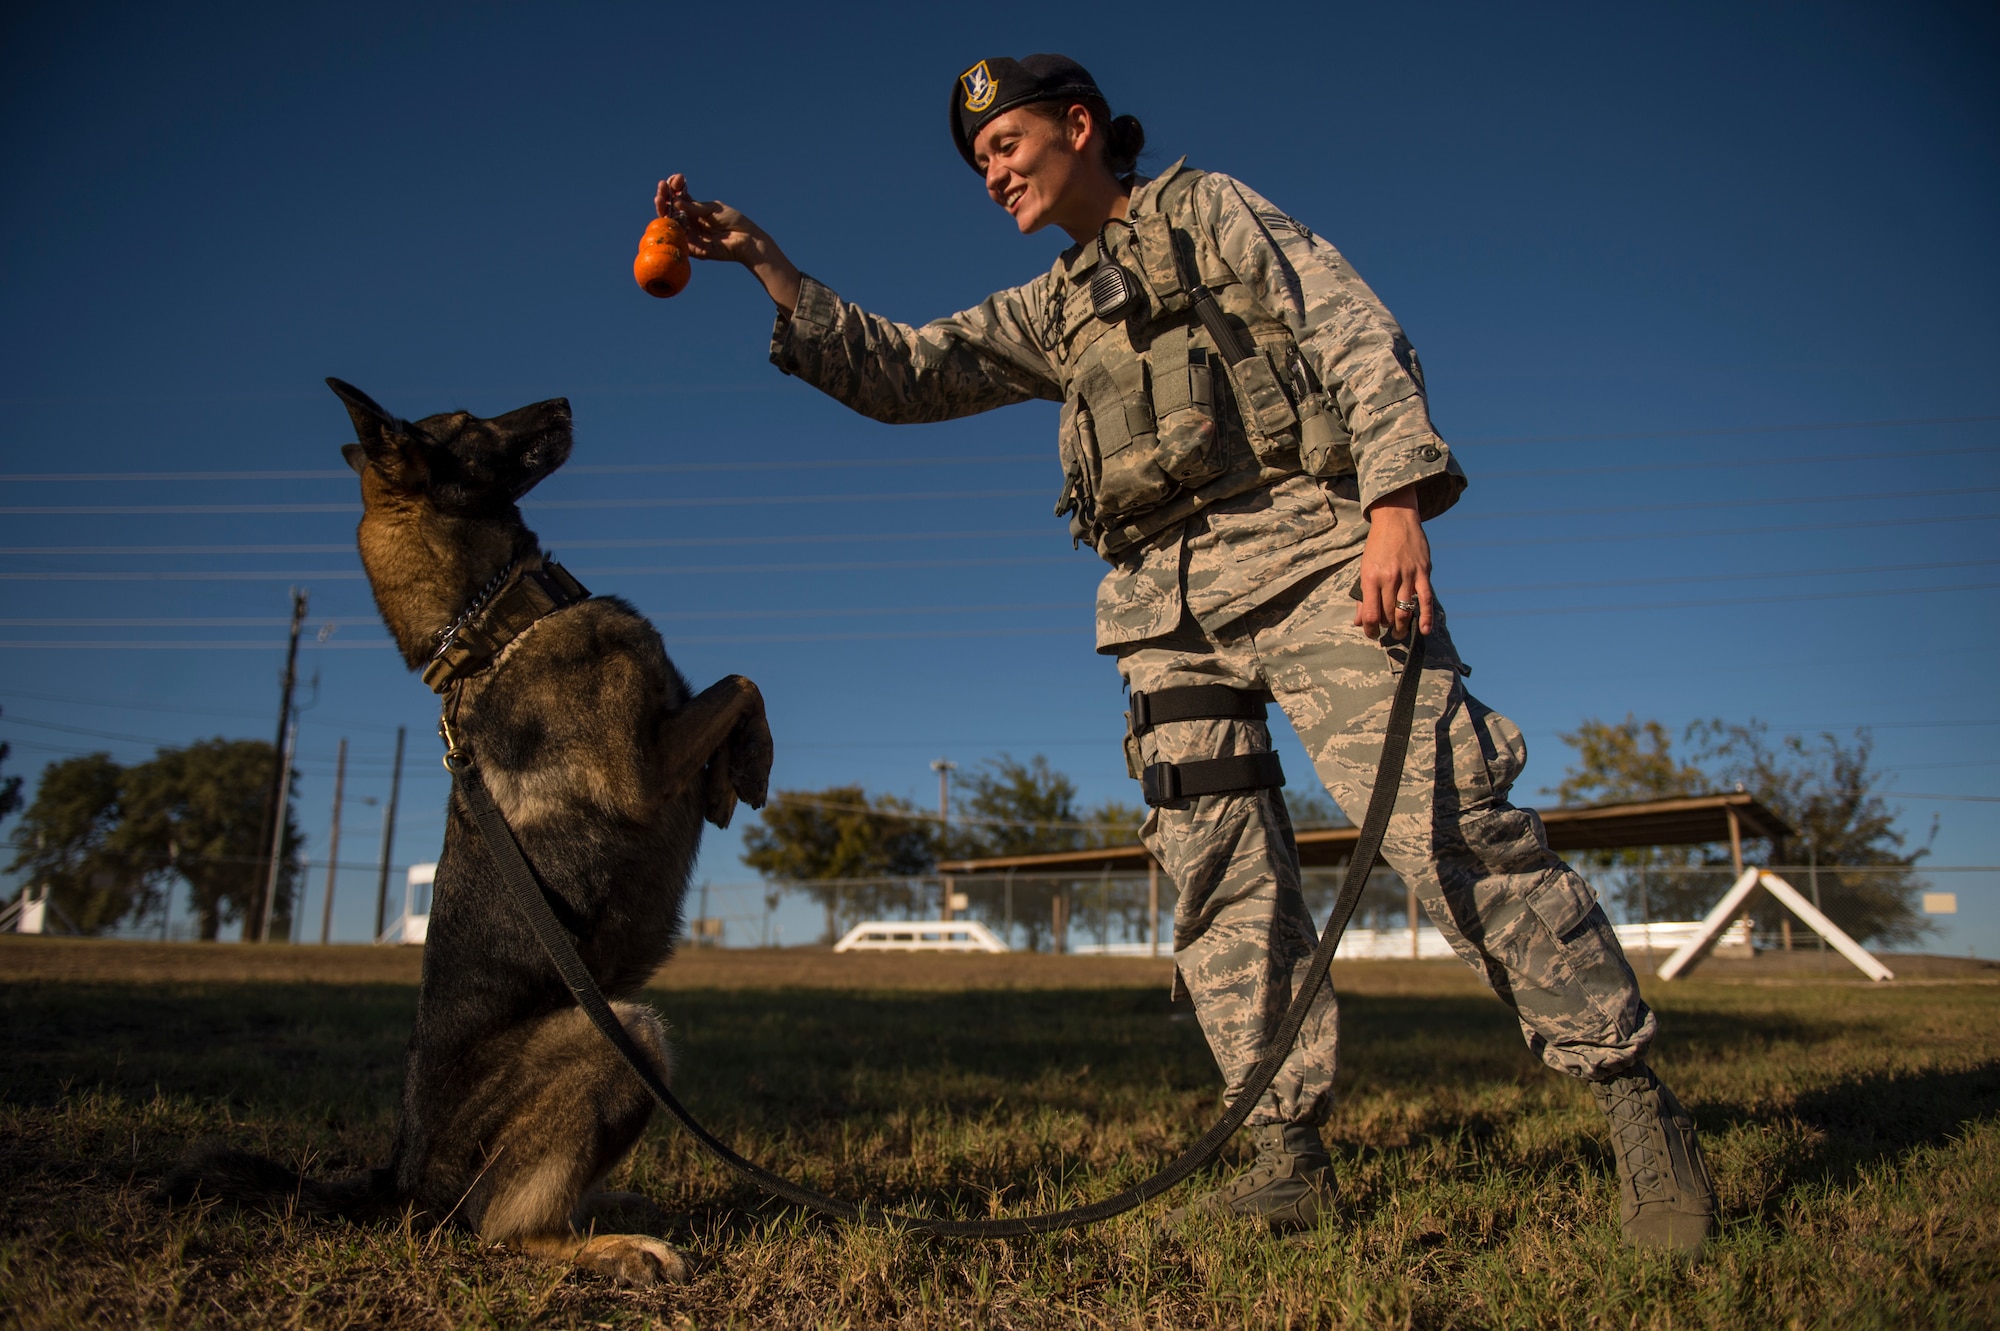 Senior Airman Chelsea LaFever gestures for ZZusa to "sit pretty" during training at Joint Base San Antonio-Lackland, Texas. Upon completion of training tasks, LaFever, a military working dog handler,  encourages ZZusa with a treat. LaFever and ZZusa have been training and developing chemistry to complete the day-to-day mission at JBSA-Lackland. (U.S. Air force photo/Staff Sgt. Vernon Young Jr.)